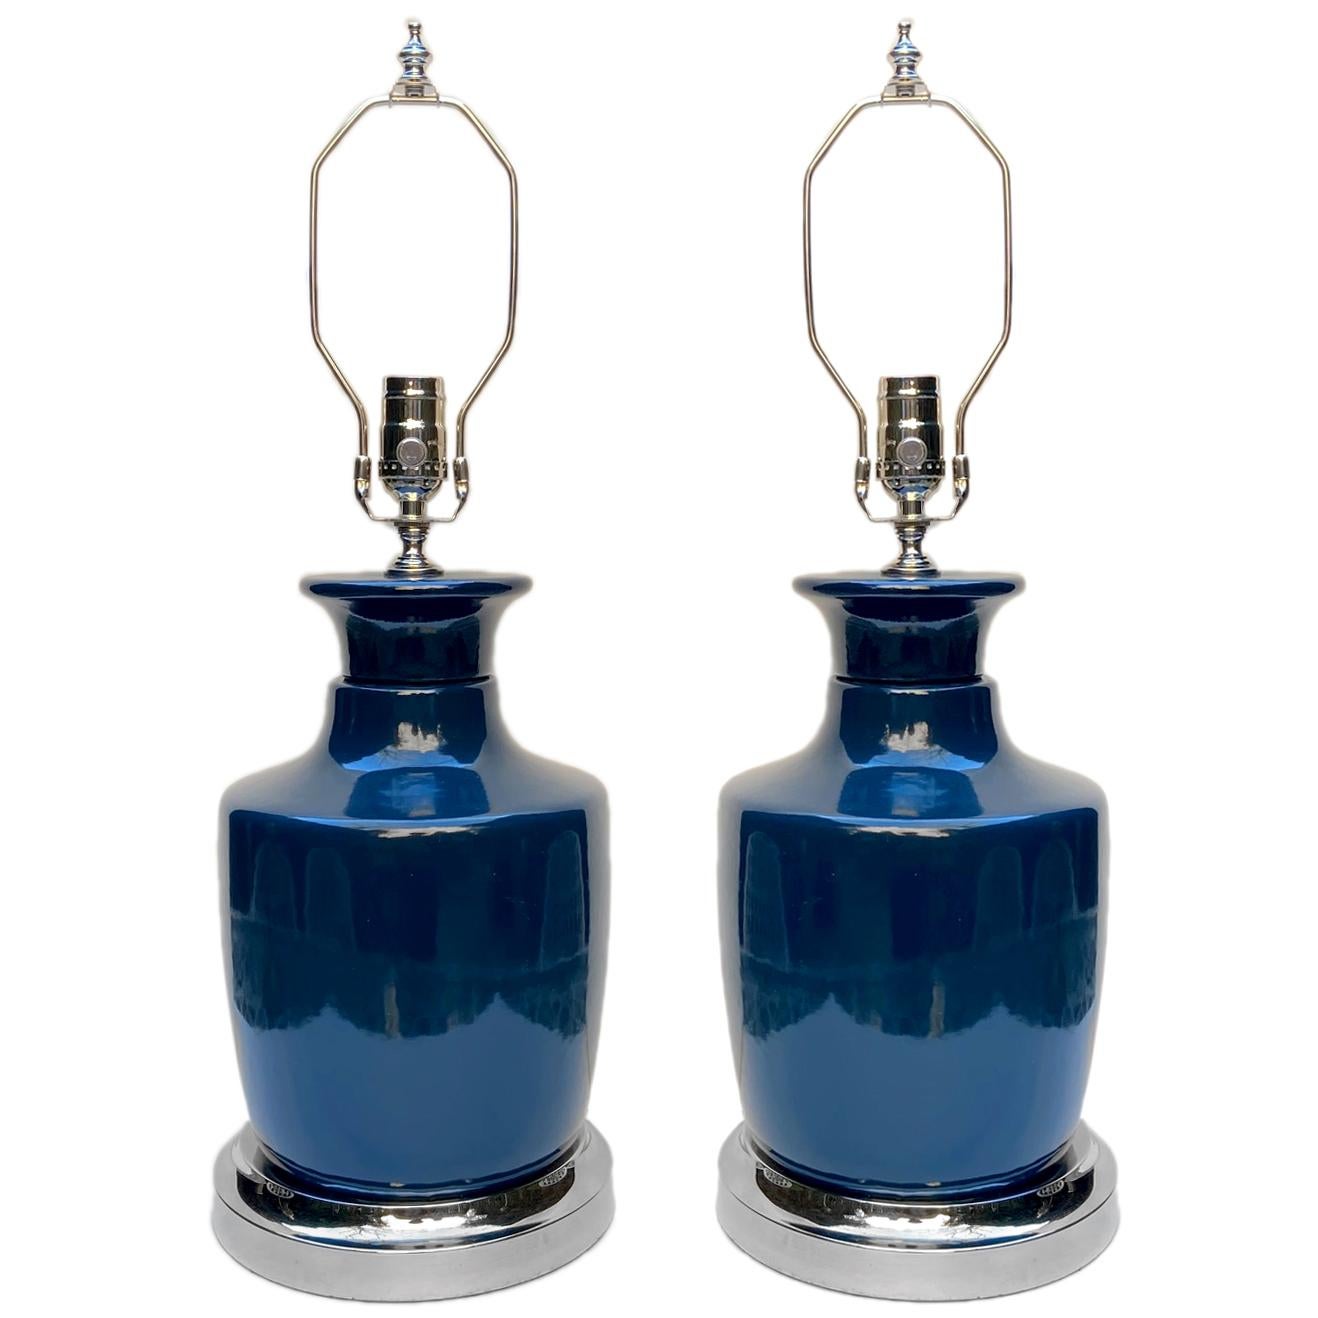 A pair of circa 1950s Italian blue table lamps with silver plated bases.

Measurements:
Height of body 13